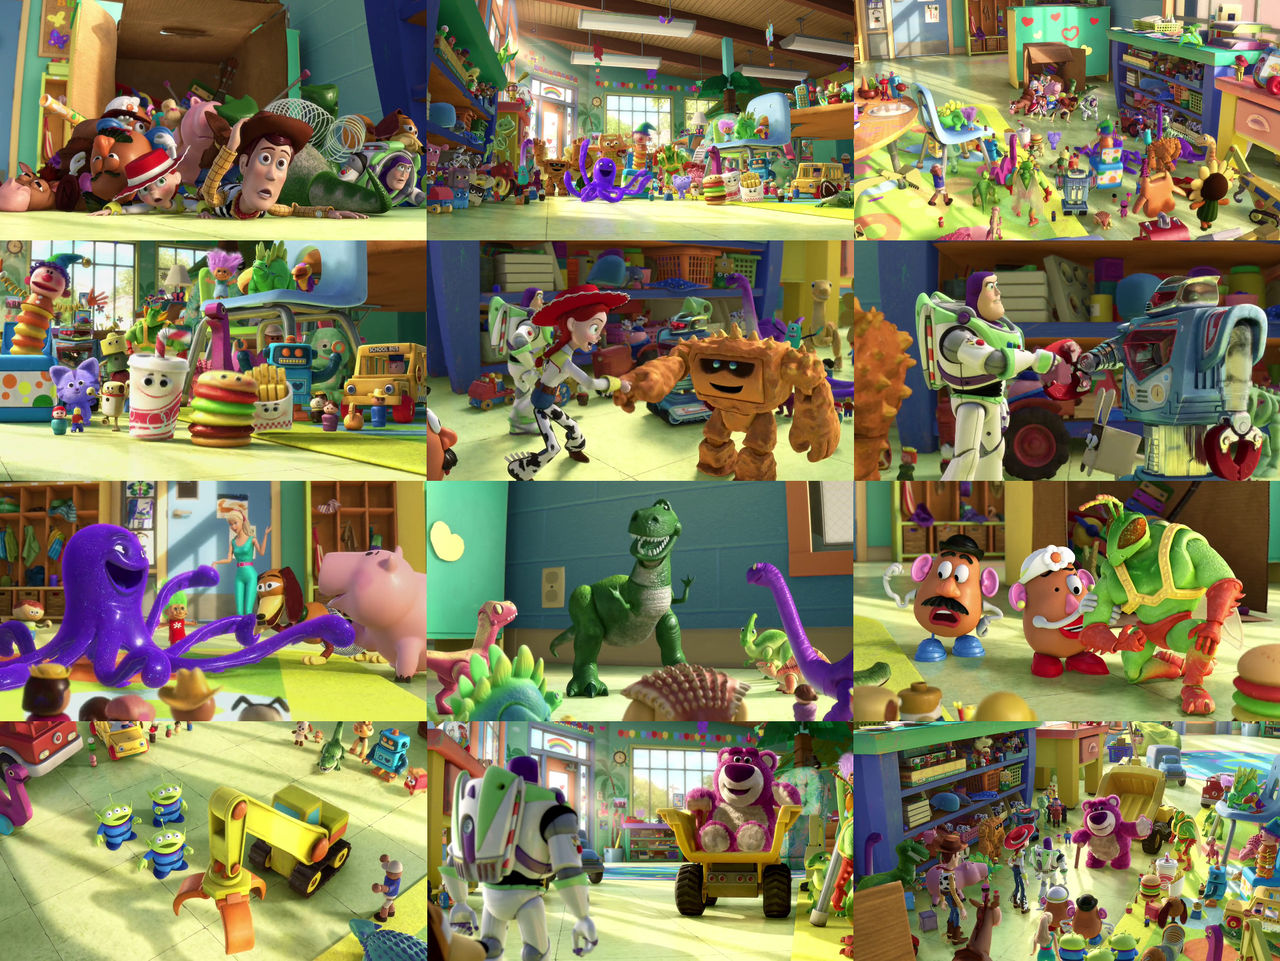 toy-story-3-welcome-to-sunnyside-by-dlee1293847-on-deviantart